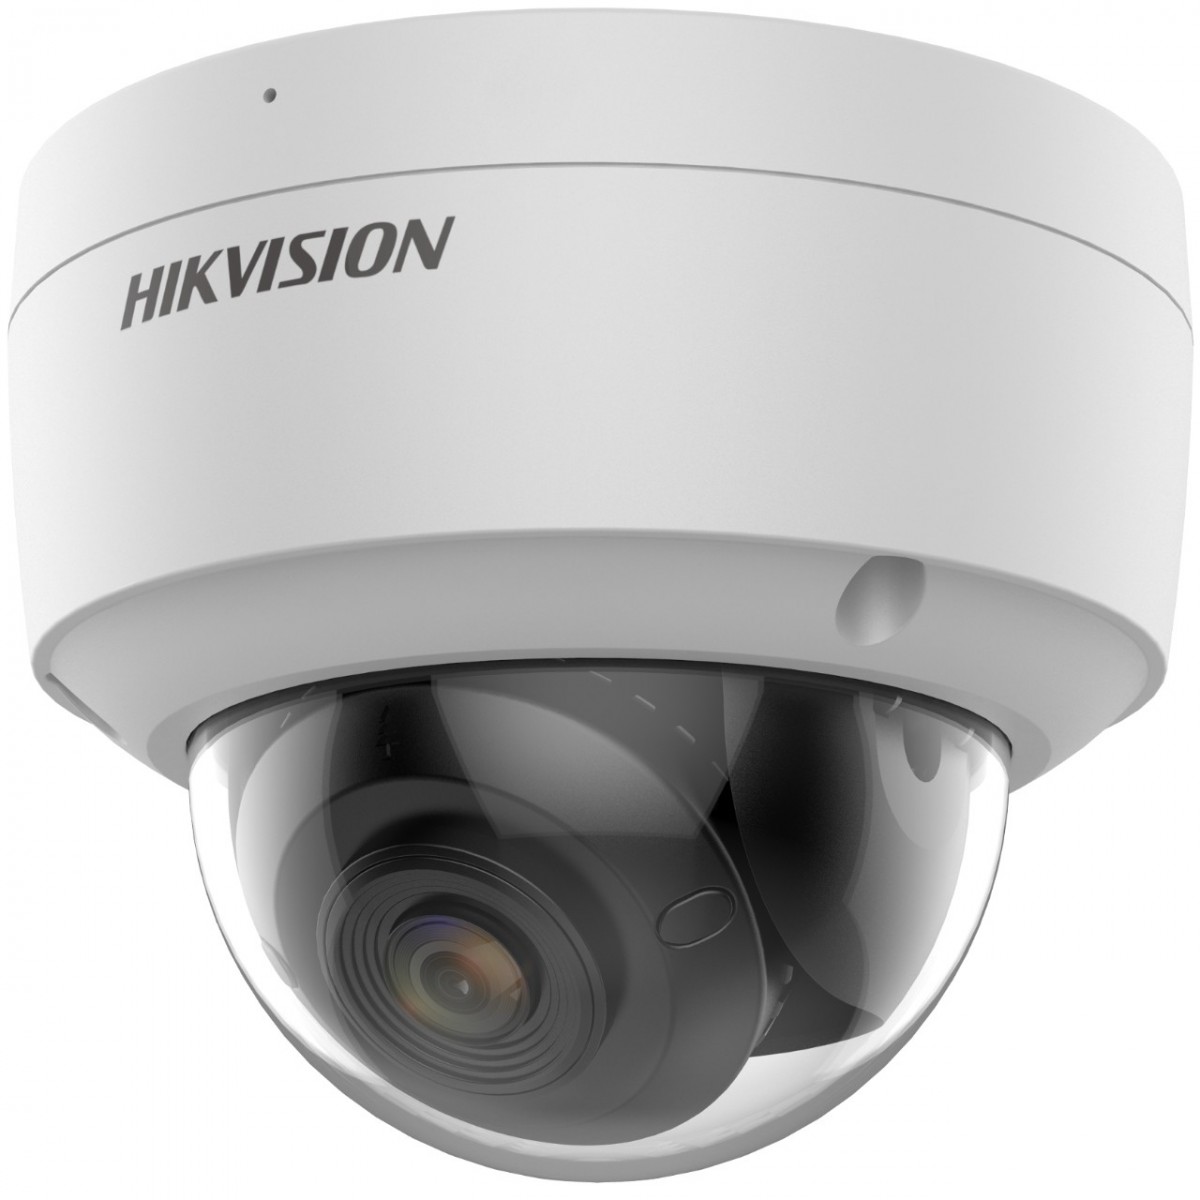 Hikvision 4MP Dome with ColorVu 2.8mm fixed lens - Network Camera